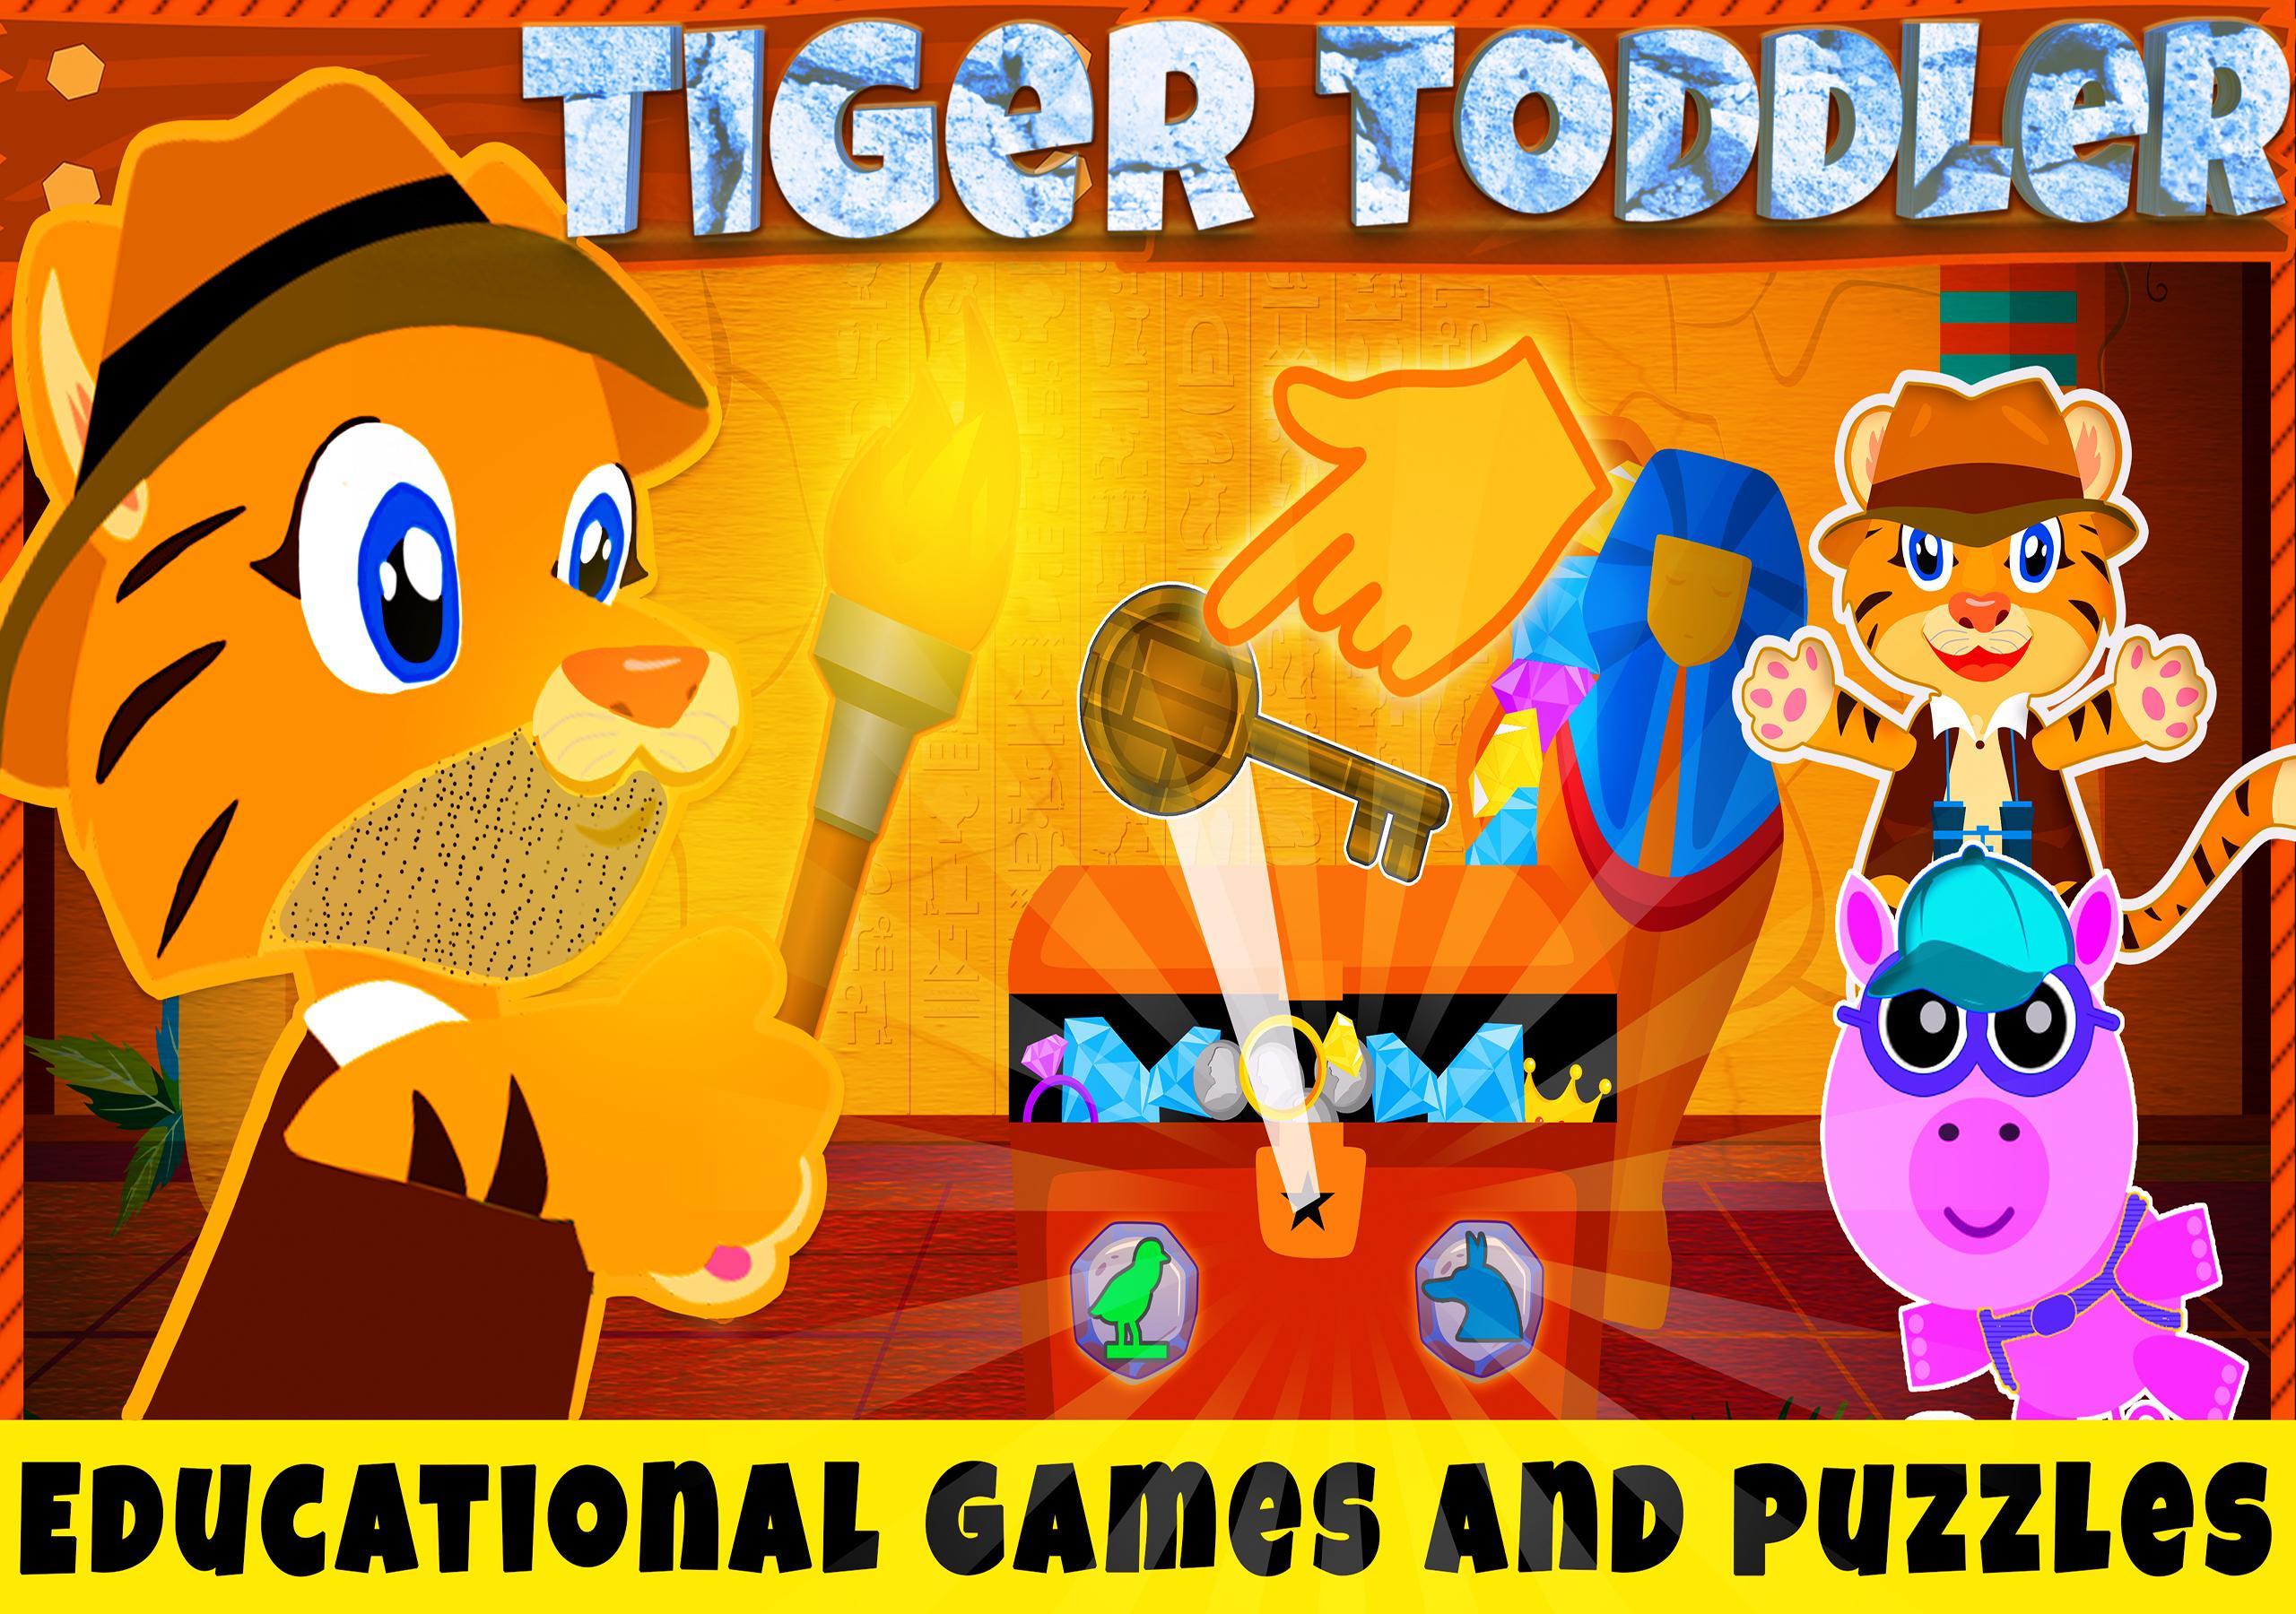 Tiger Piggy Roblox Piggy Characters Pictures